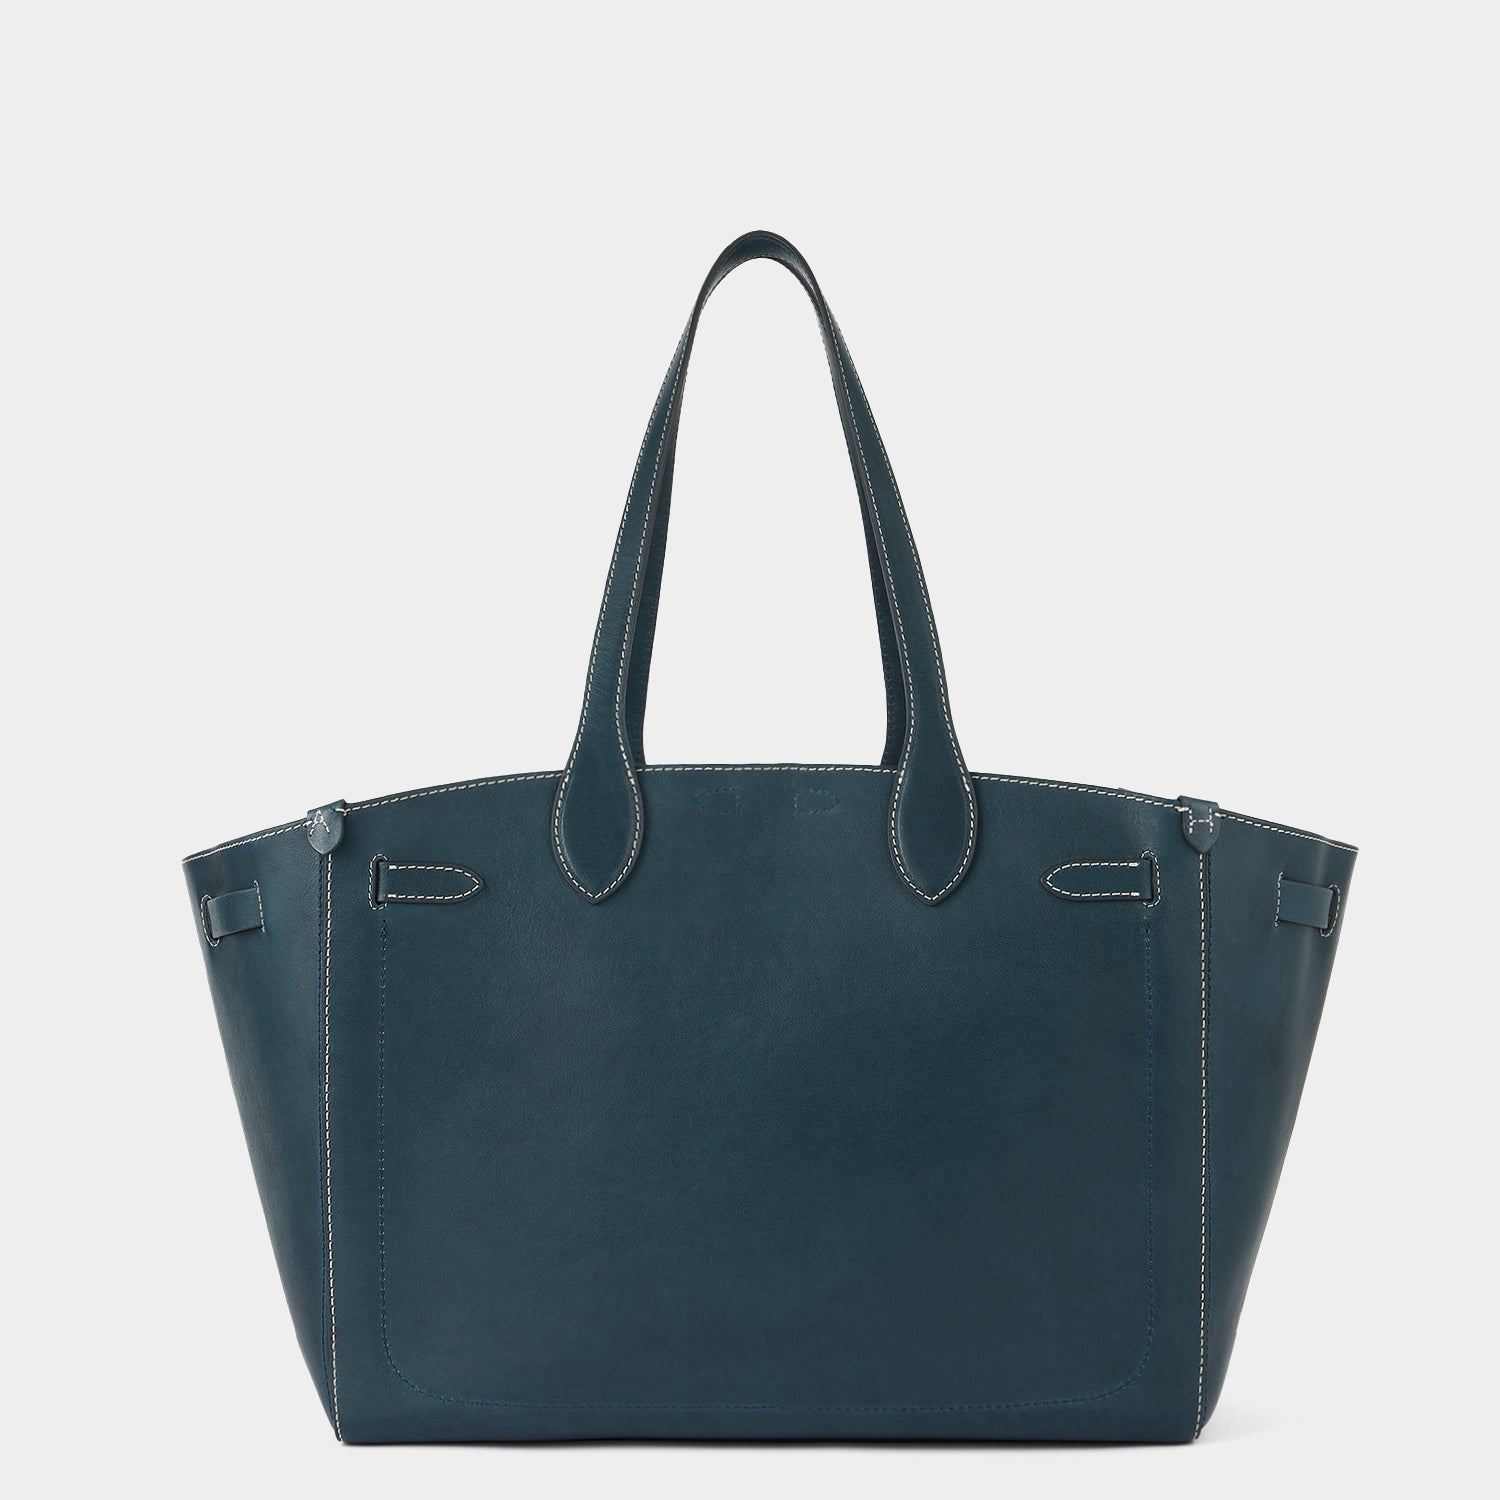 Return to Nature Tote -

                  
                    Compostable Leather in Dark Holly -
                  

                  Anya Hindmarch UK
